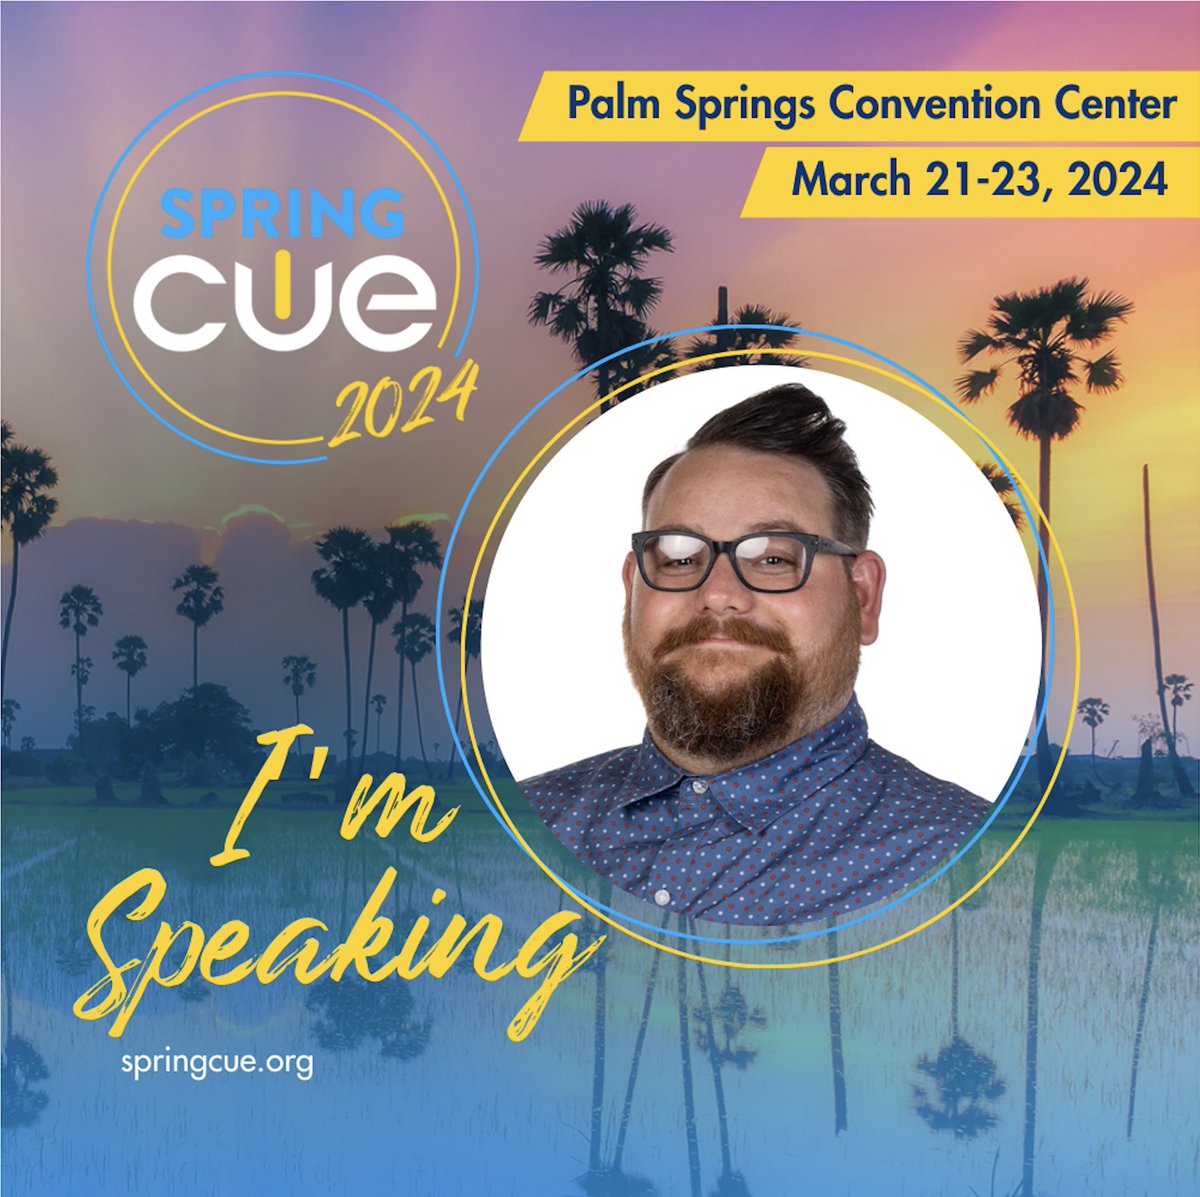 I’m speaking at CUE! I’ll be talking Gamification, AI, and Immersive Learning in Social Science #Gamification #CUE2024 #springCUE